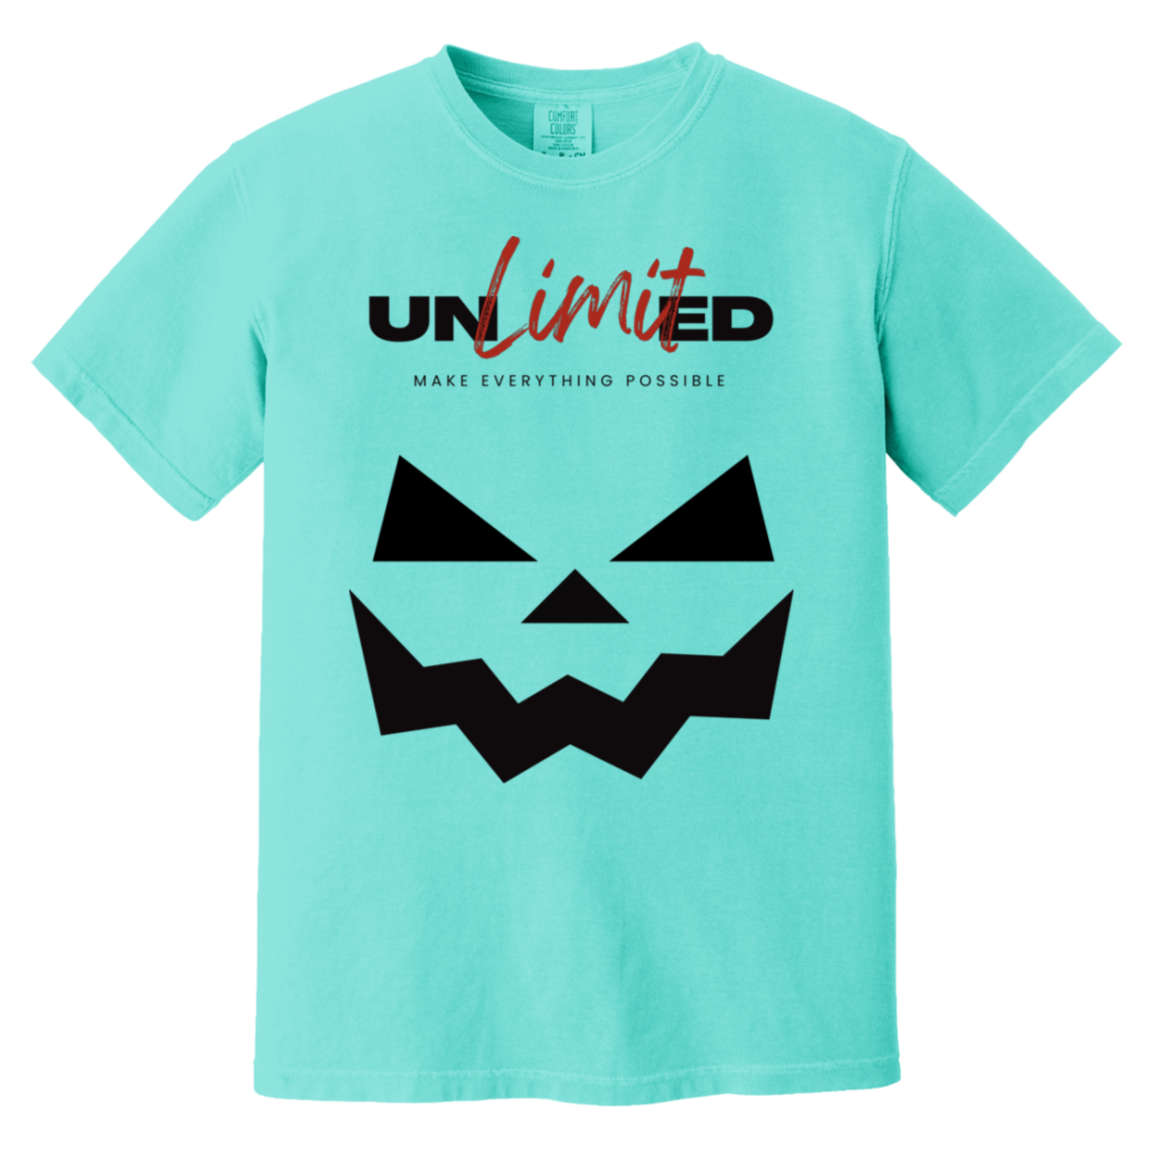 Unlimited Make everything Possible T-Shirt